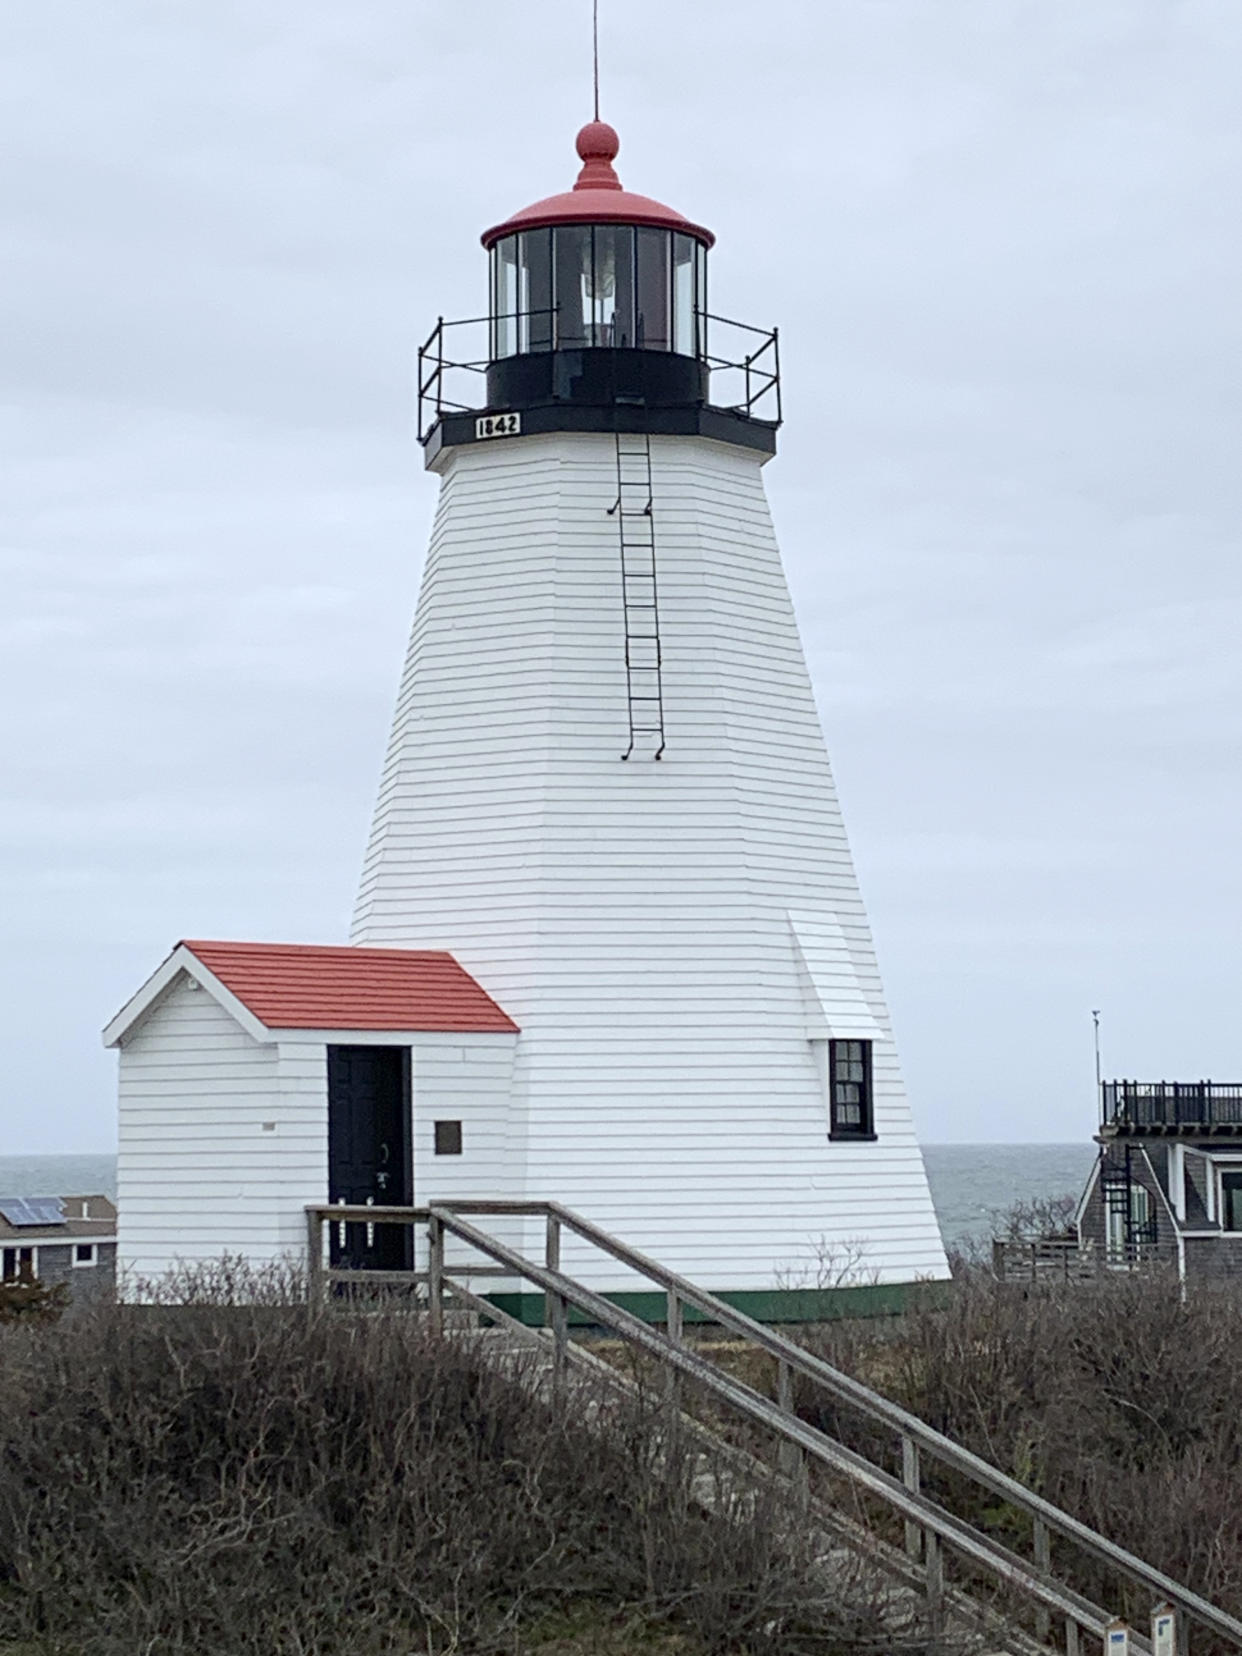 Plymouth Light Station, with an octagonal wooden structure dates to 1842, stands near Cape Cod Bay and Plymouth Bay, April 5, 2023, in Plymouth, Mass. The federal government's annual effort to give away or sell lighthouses that are no longer needed for navigation purposes includes 10 lighthouses this year. (Paul Hughes/General Services Administration via AP)